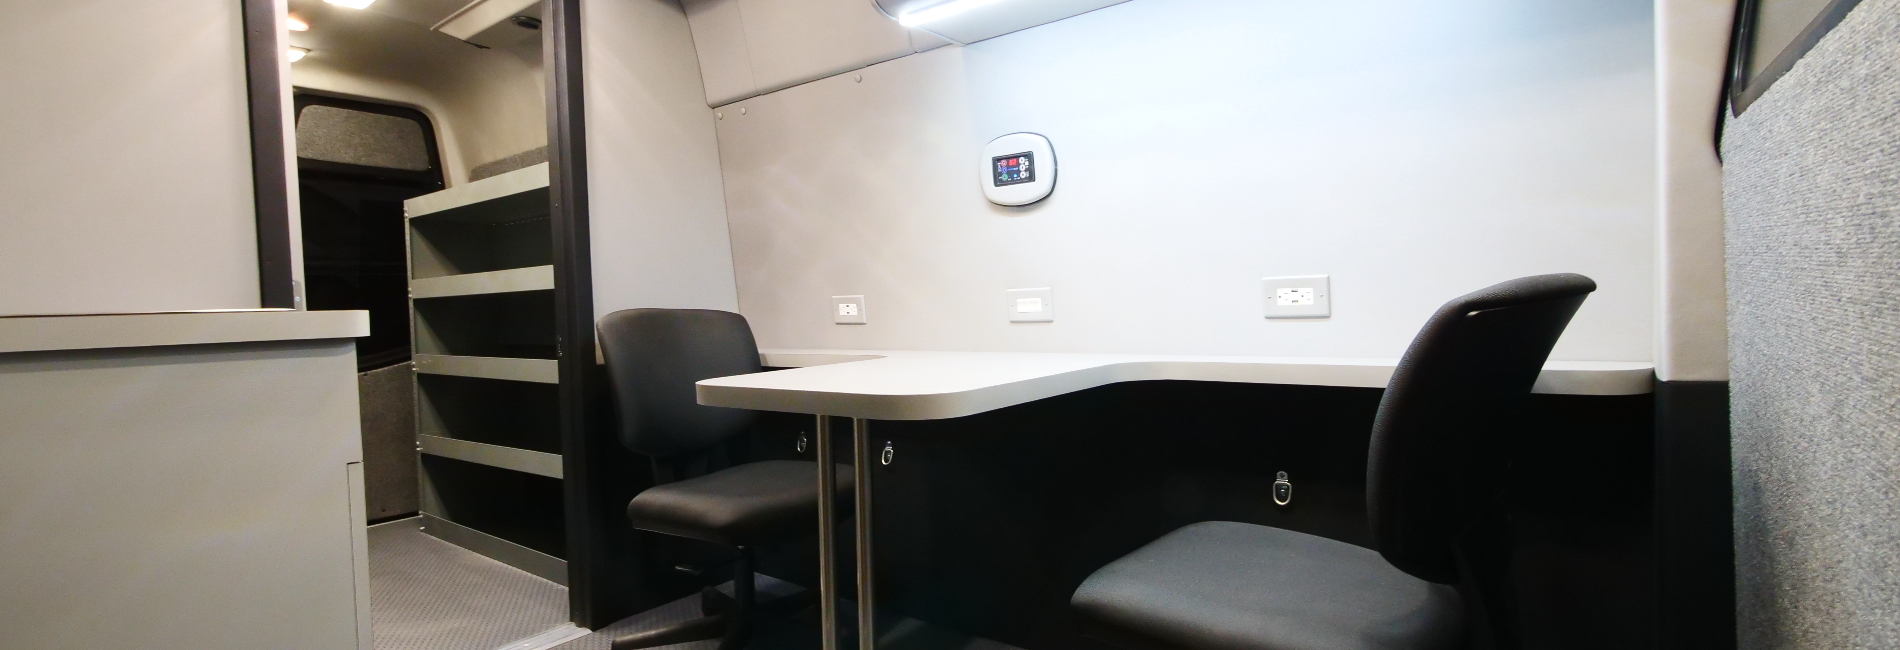 Dual mobile office layout consisting of a front workstation with a sink faucet and rear partition cargo area for equipment storage.